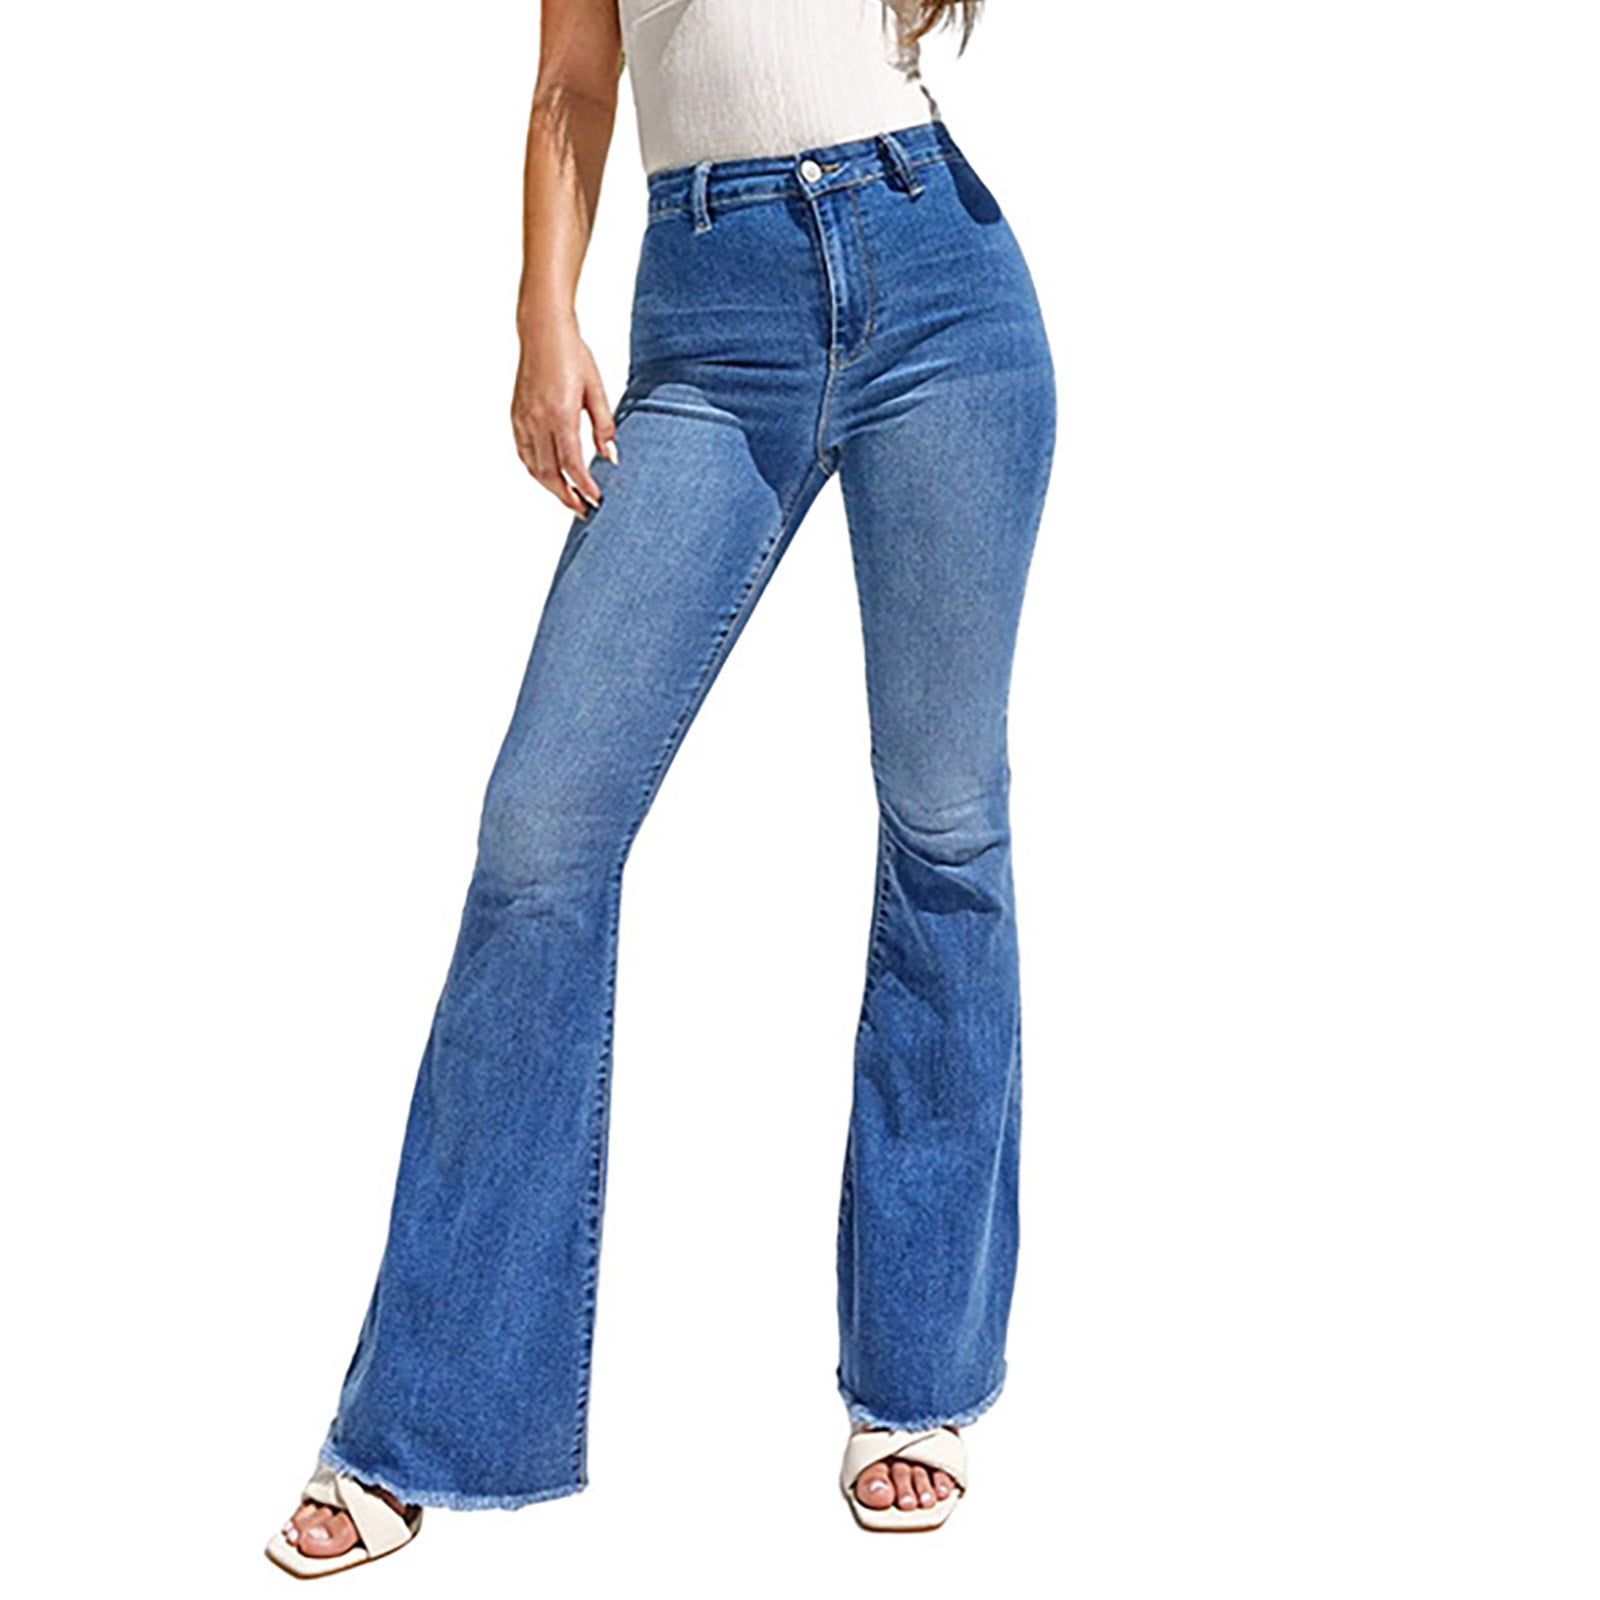  LOAMD Flare Jeans Women Summer Stretch Side Button High Waisted  Jeans Woman Sexy Skinny Push Up Bell-Bottom Pants Pantalones Light Blue :  Clothing, Shoes & Jewelry